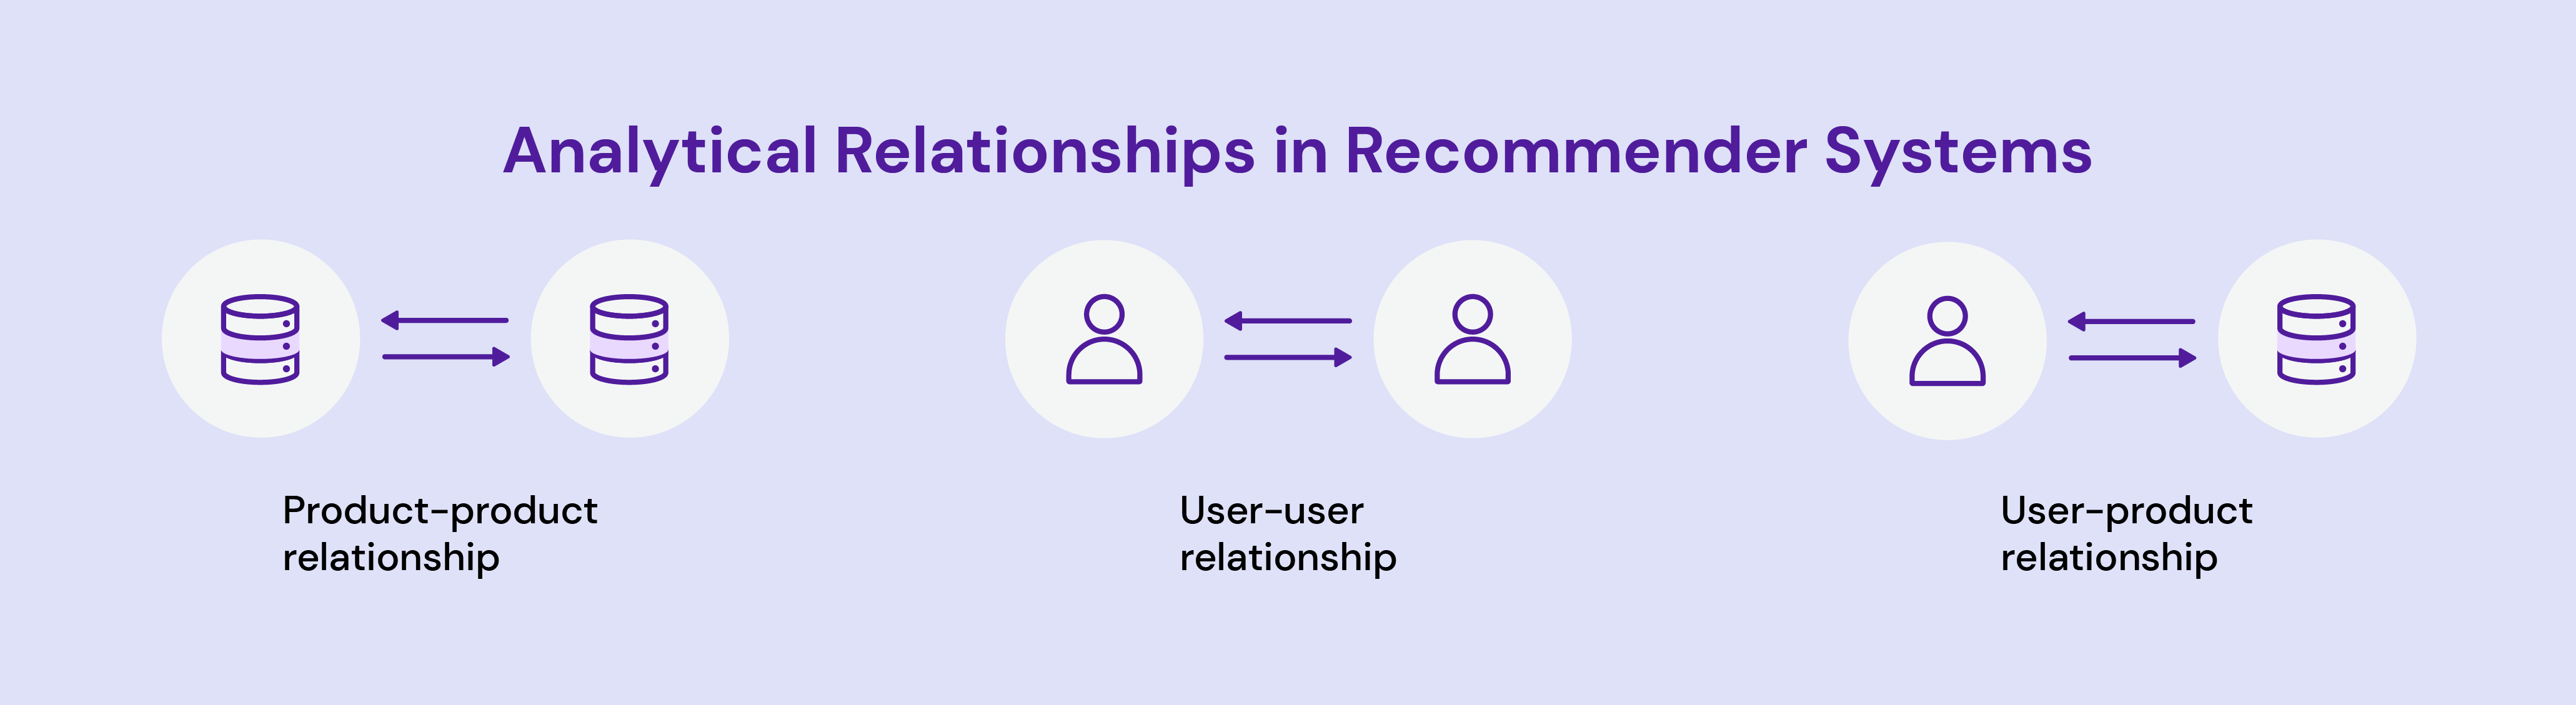 Analytical Relationship in Recommender Systems